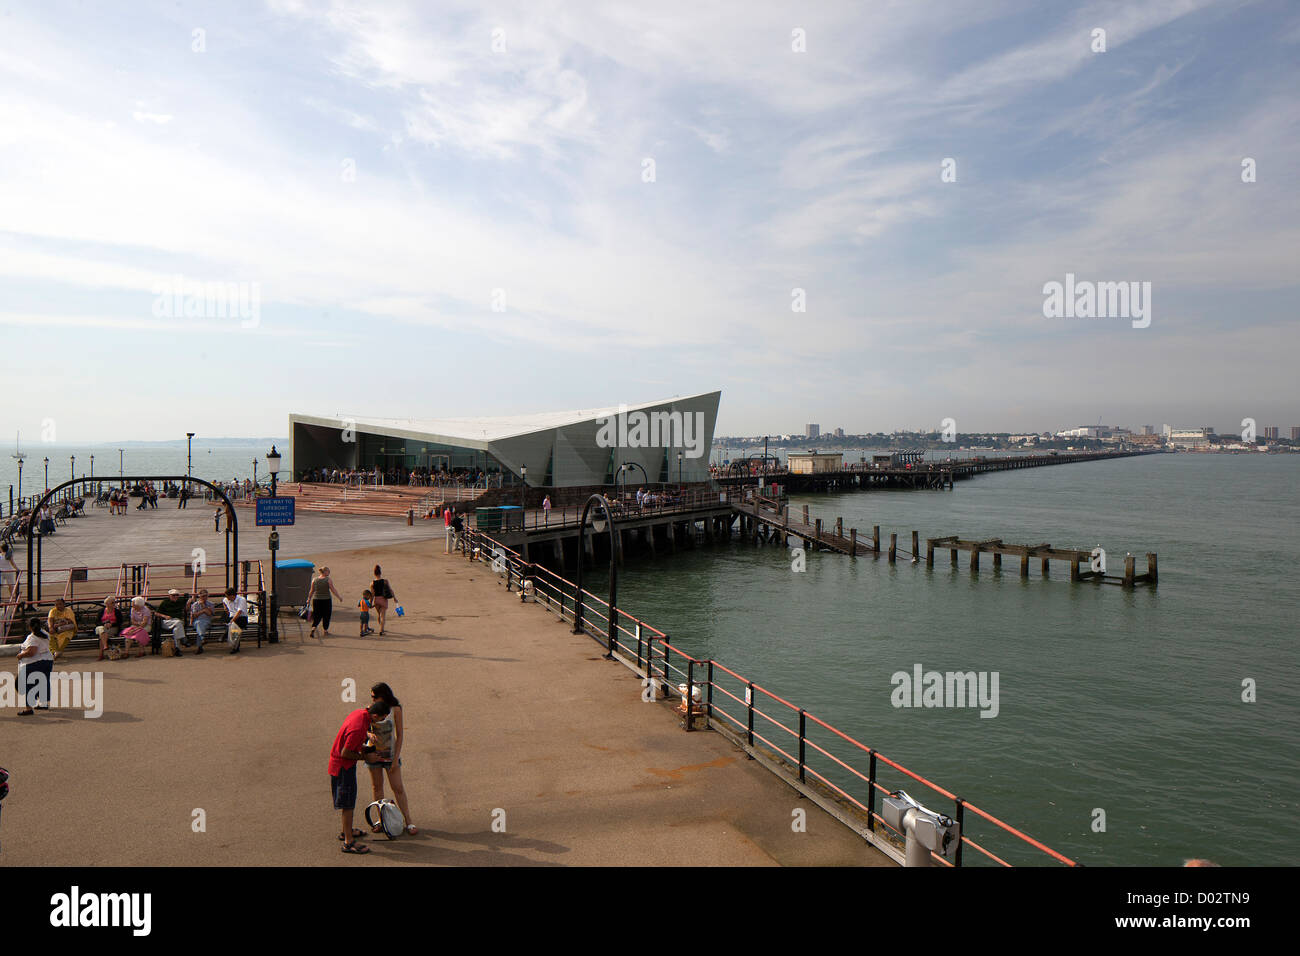 Southend Pier Cultural Centre, Southend, United Kingdom. Architect: White Architects, 2012. Main exterior with people taken from Stock Photo